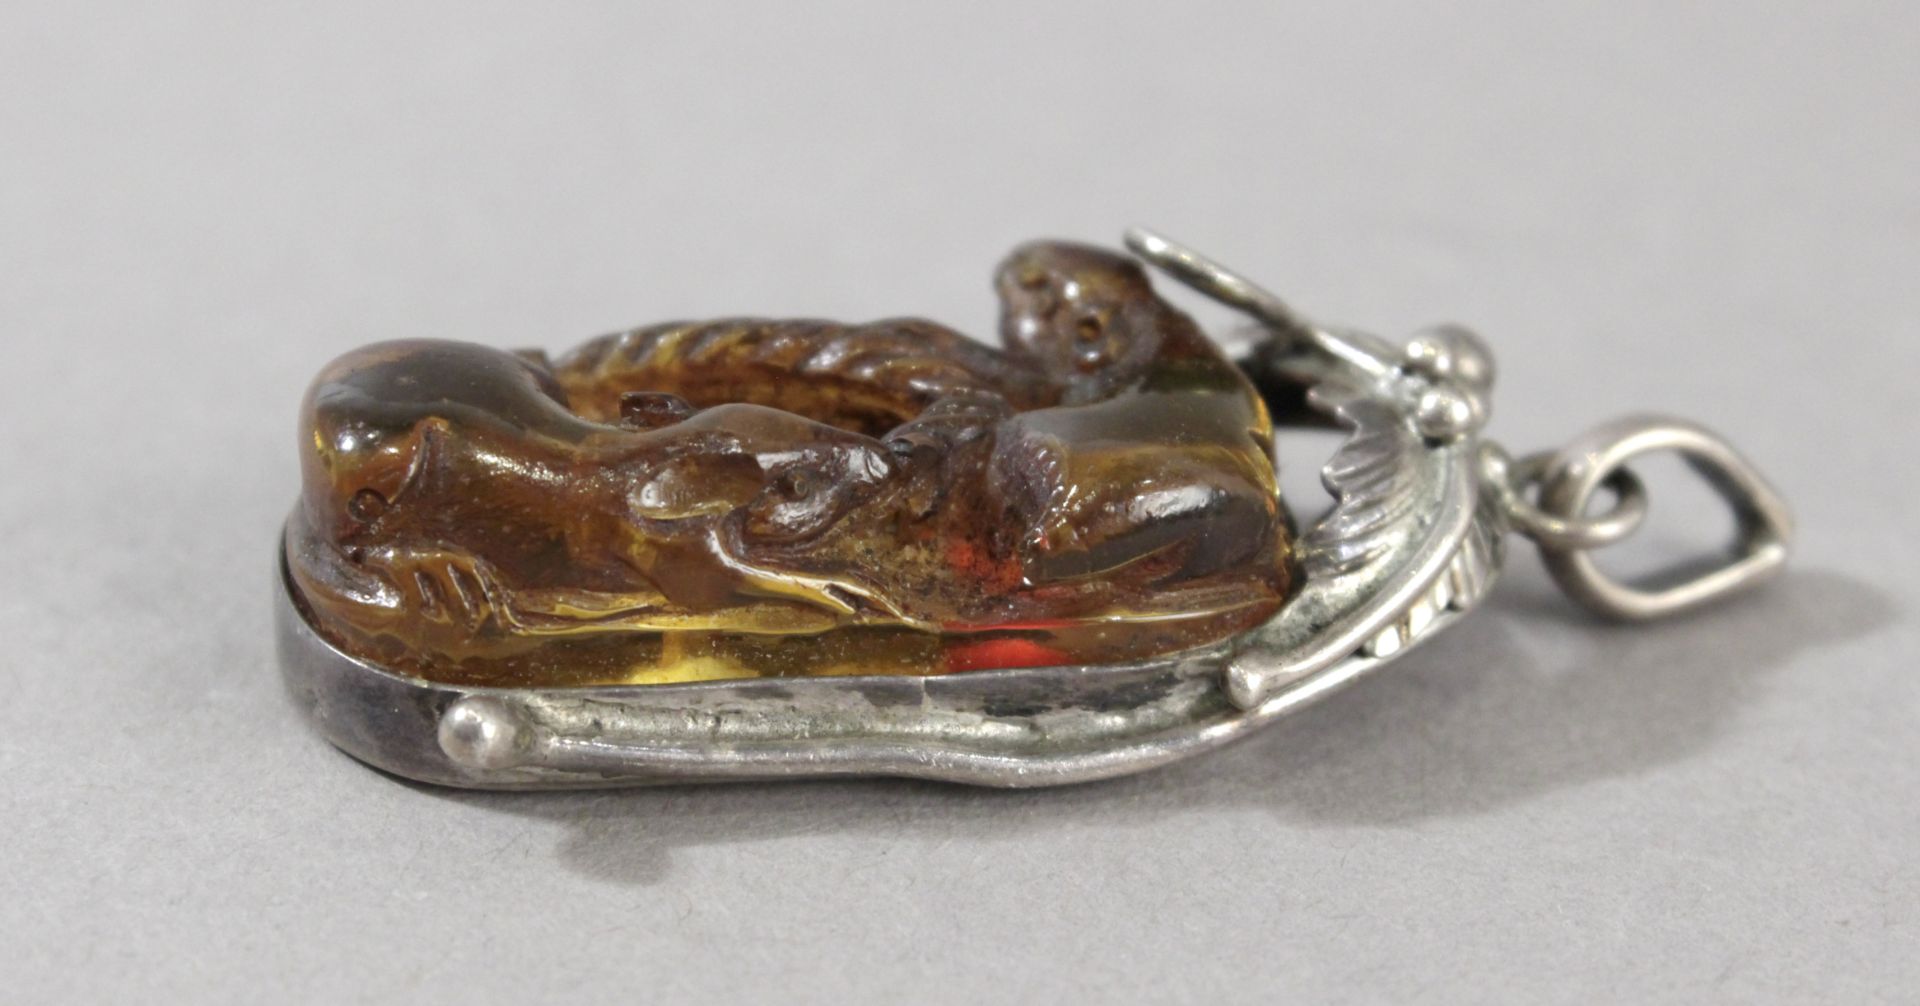 A19th century Japanese amber and silver pendant form Meiji period - Image 2 of 4